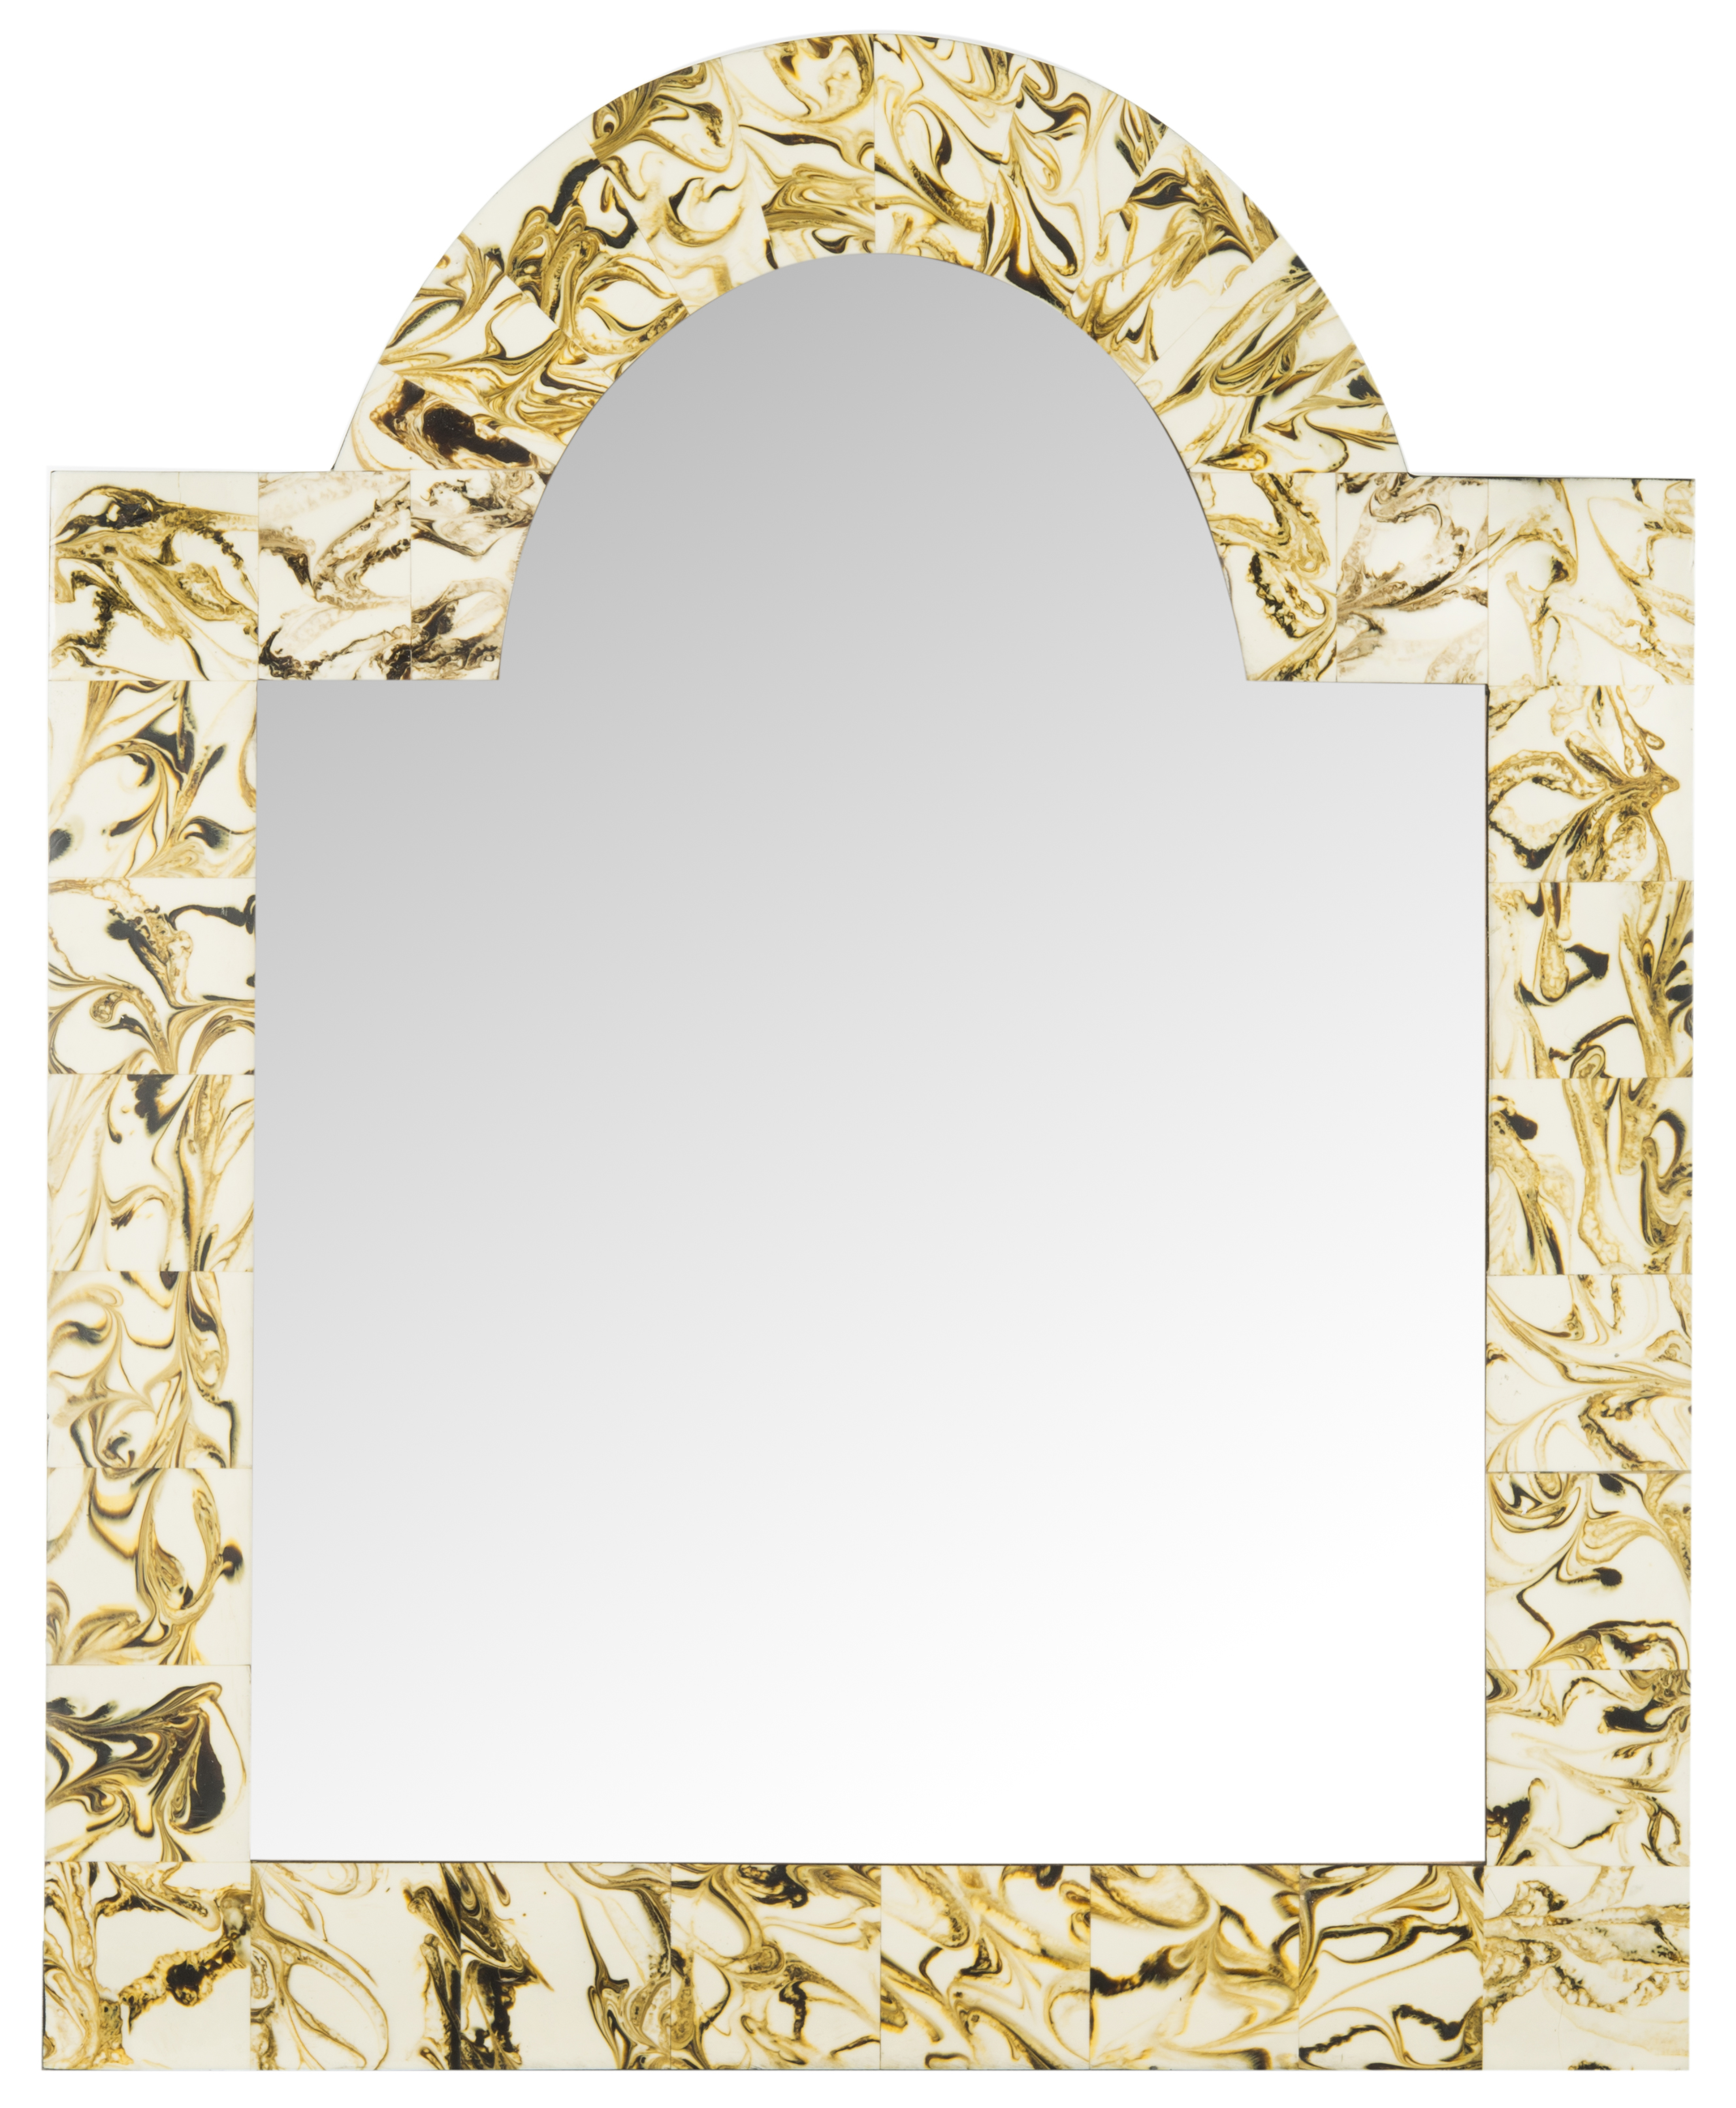 Antibes Arched Mirror - Multi - Arlo Home - Arlo Home